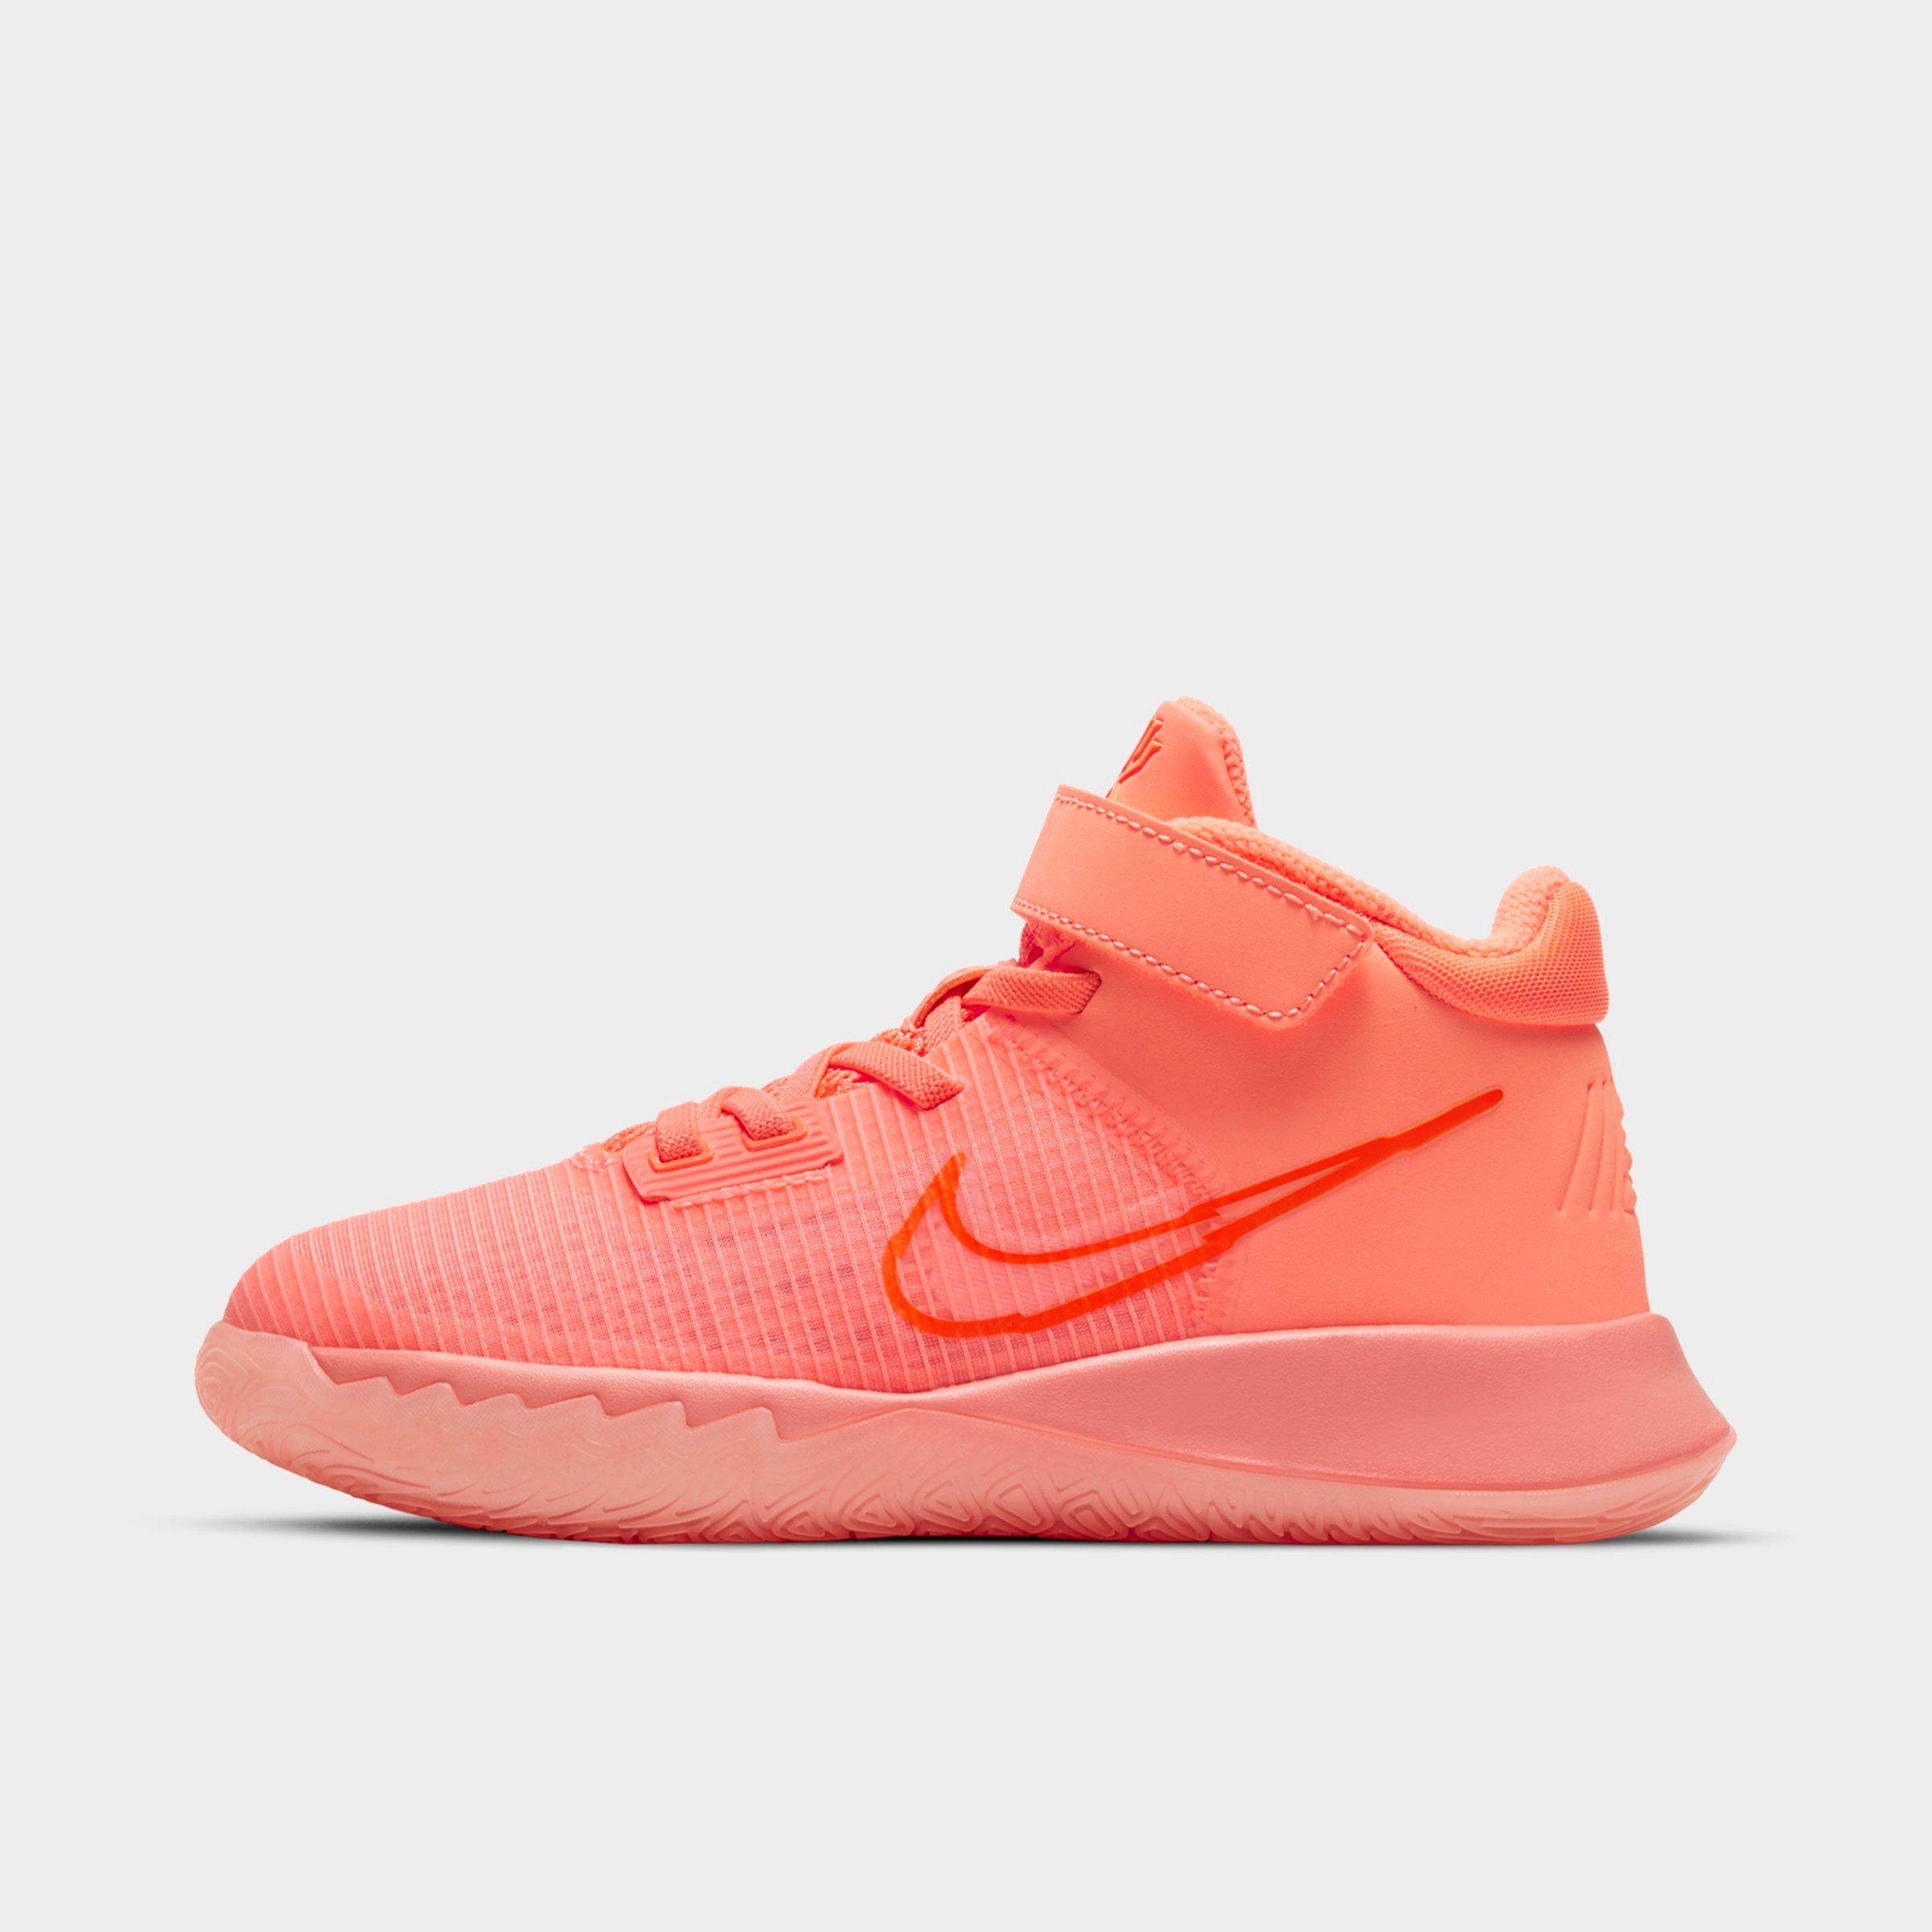 kyrie shoes online